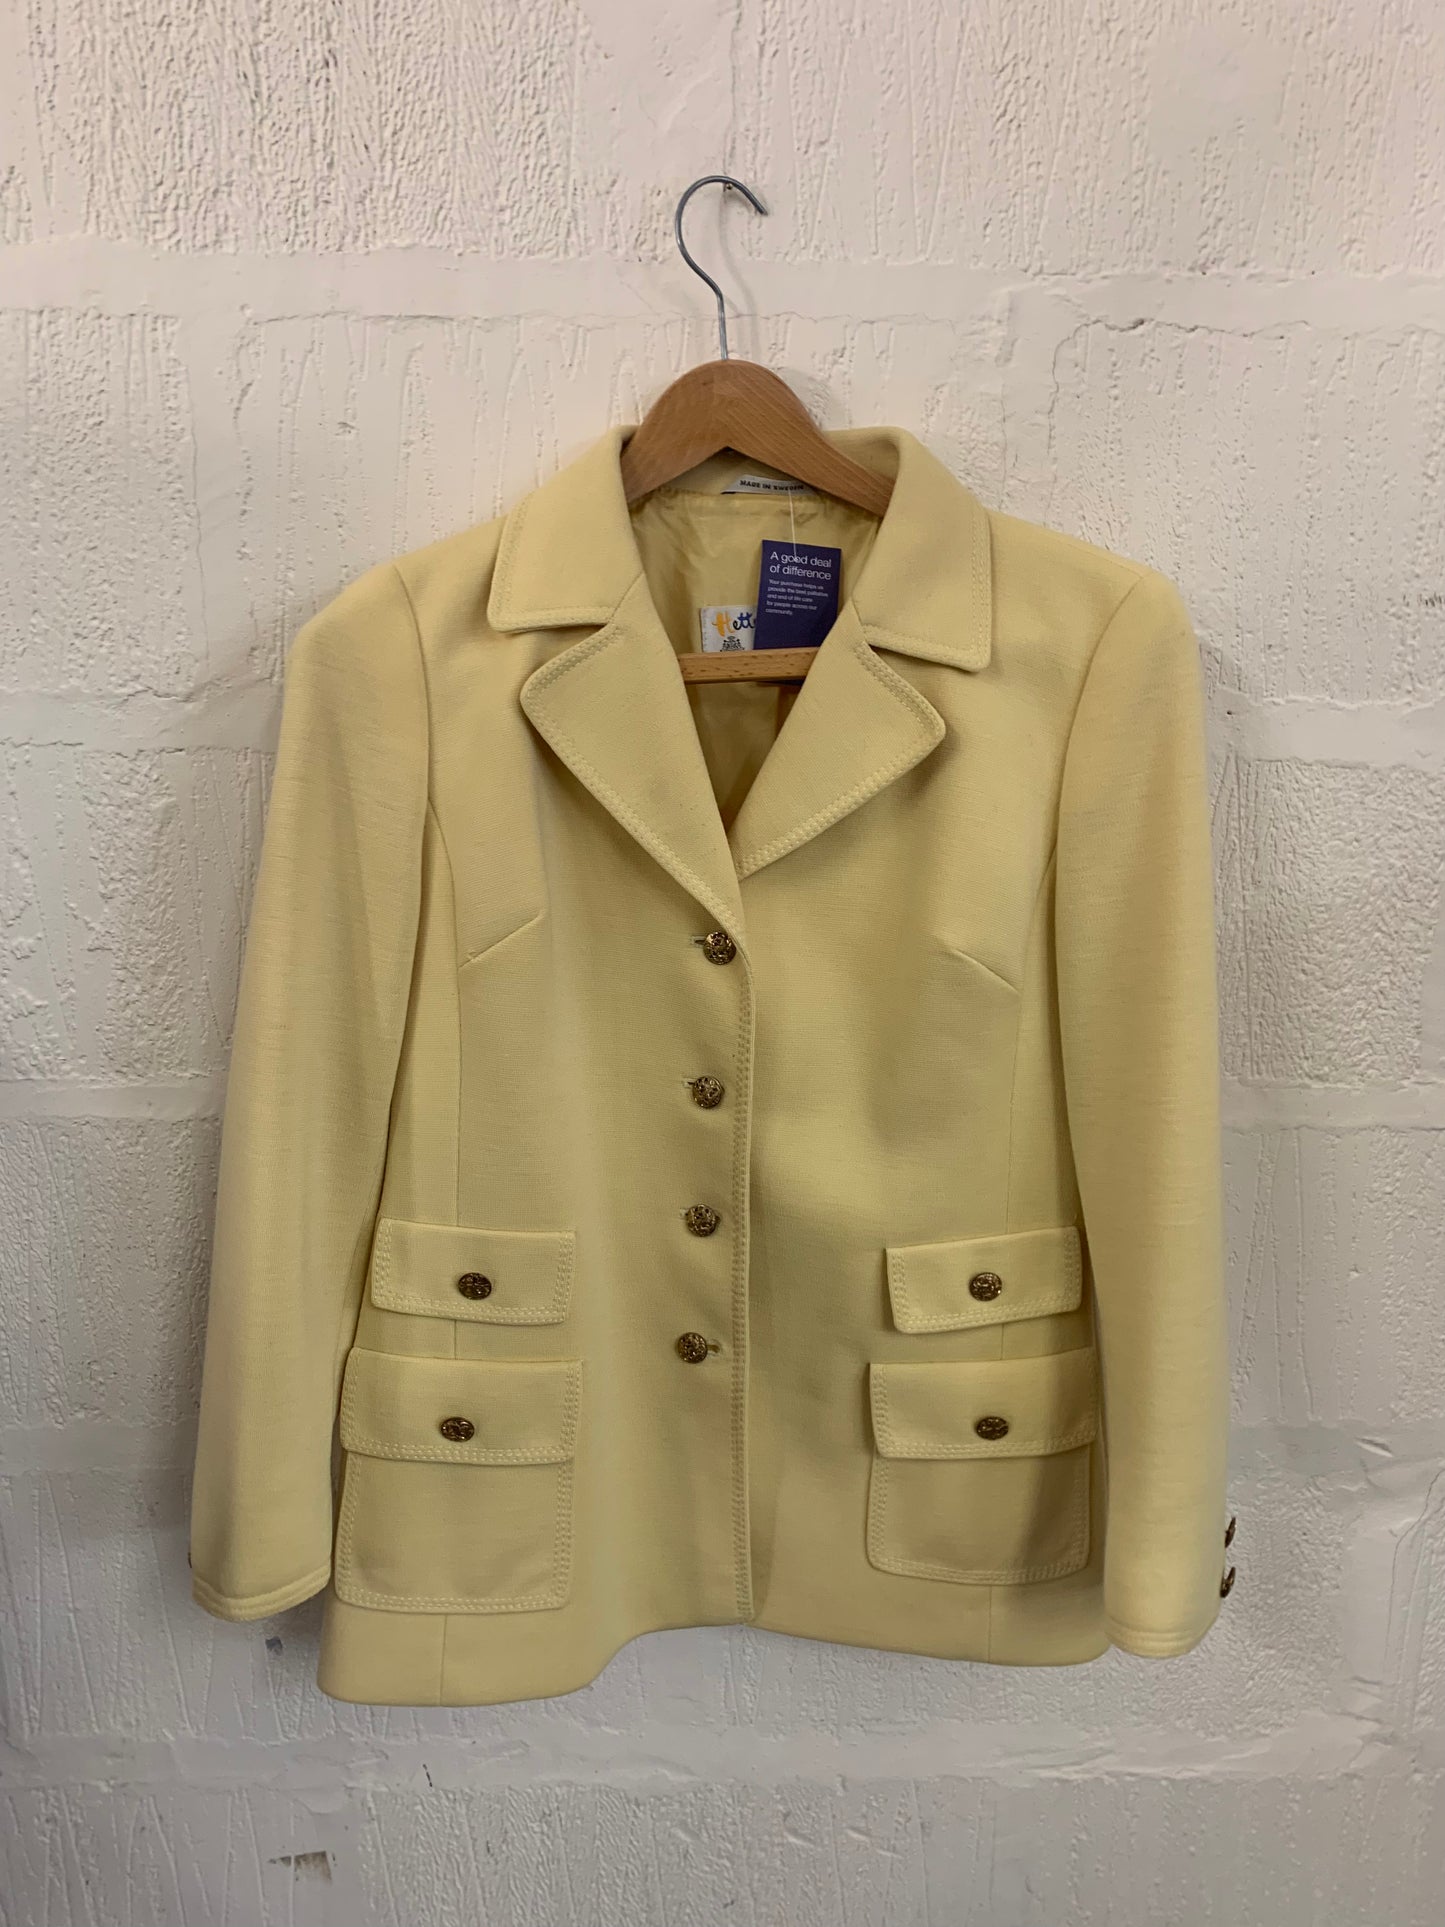 Vintage 1960s Style Hettemarks Pale Yellow Wool Jacket Size 12